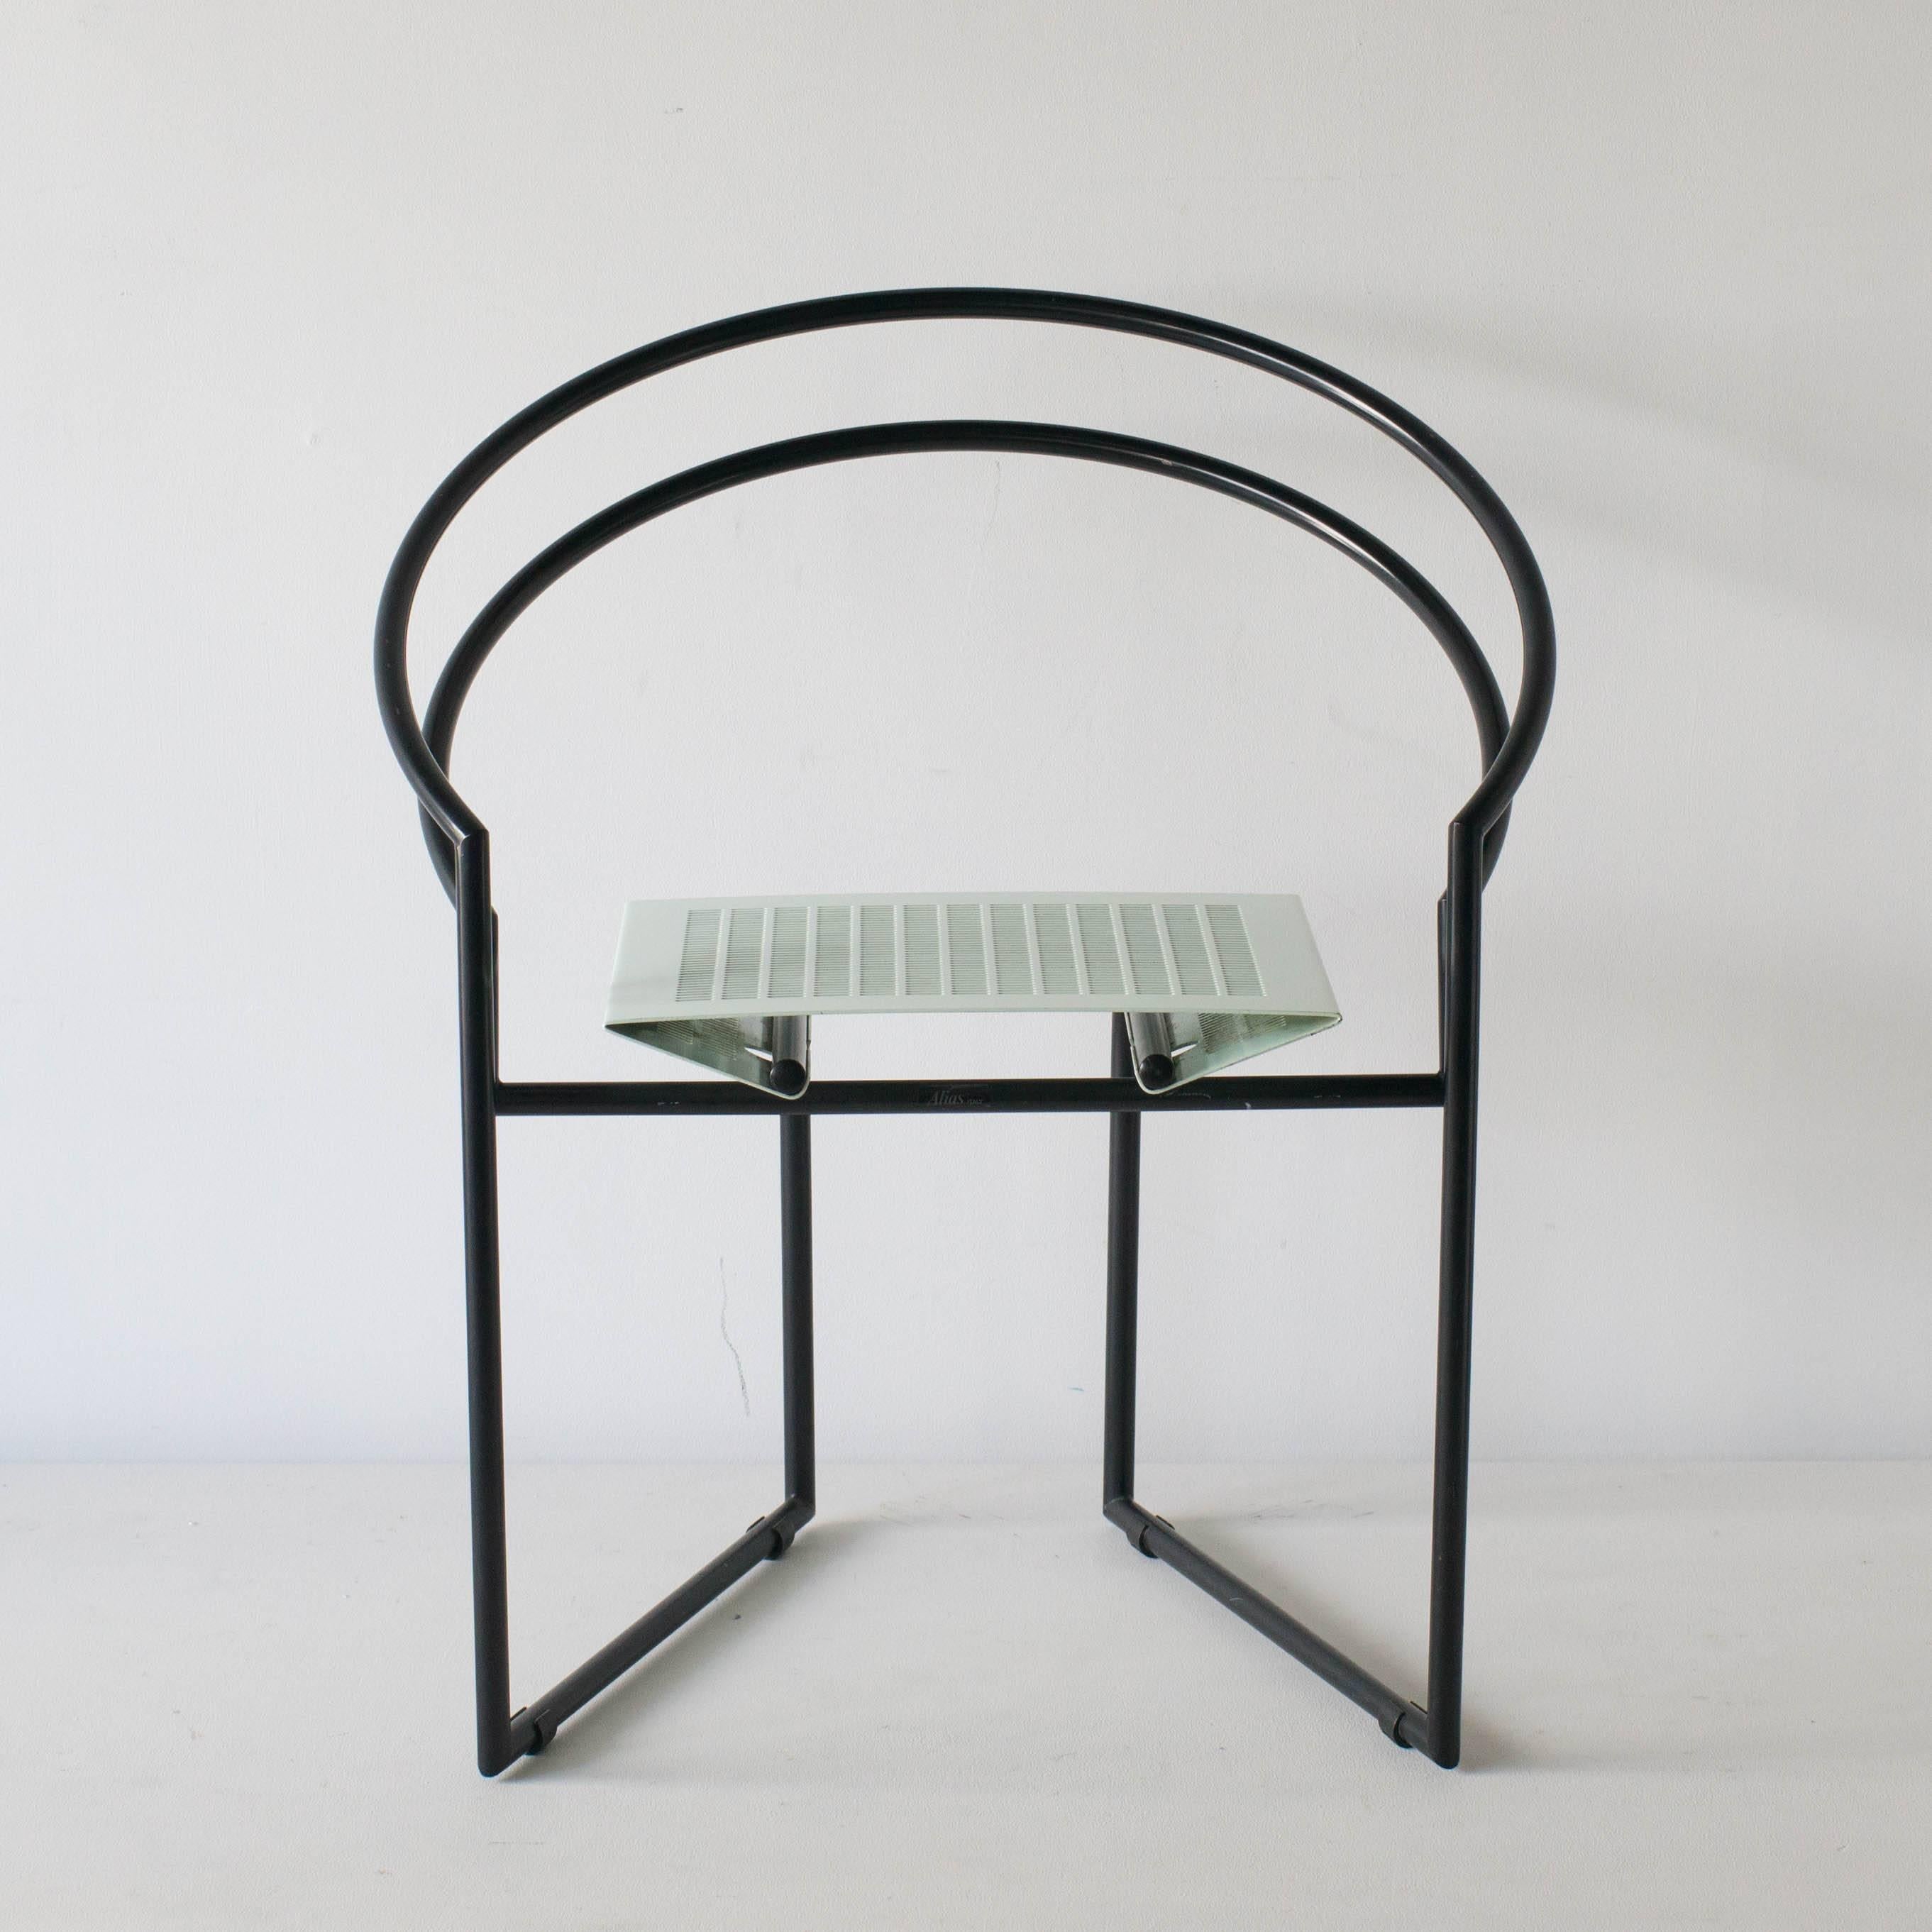 Latonda chair by Italian architect Mario Botta. Black steel pipe frame and peppermint bent punching metal sheet seat and back. It has very interesting form, but comfortable sitting. Four chairs available. Price is for each.